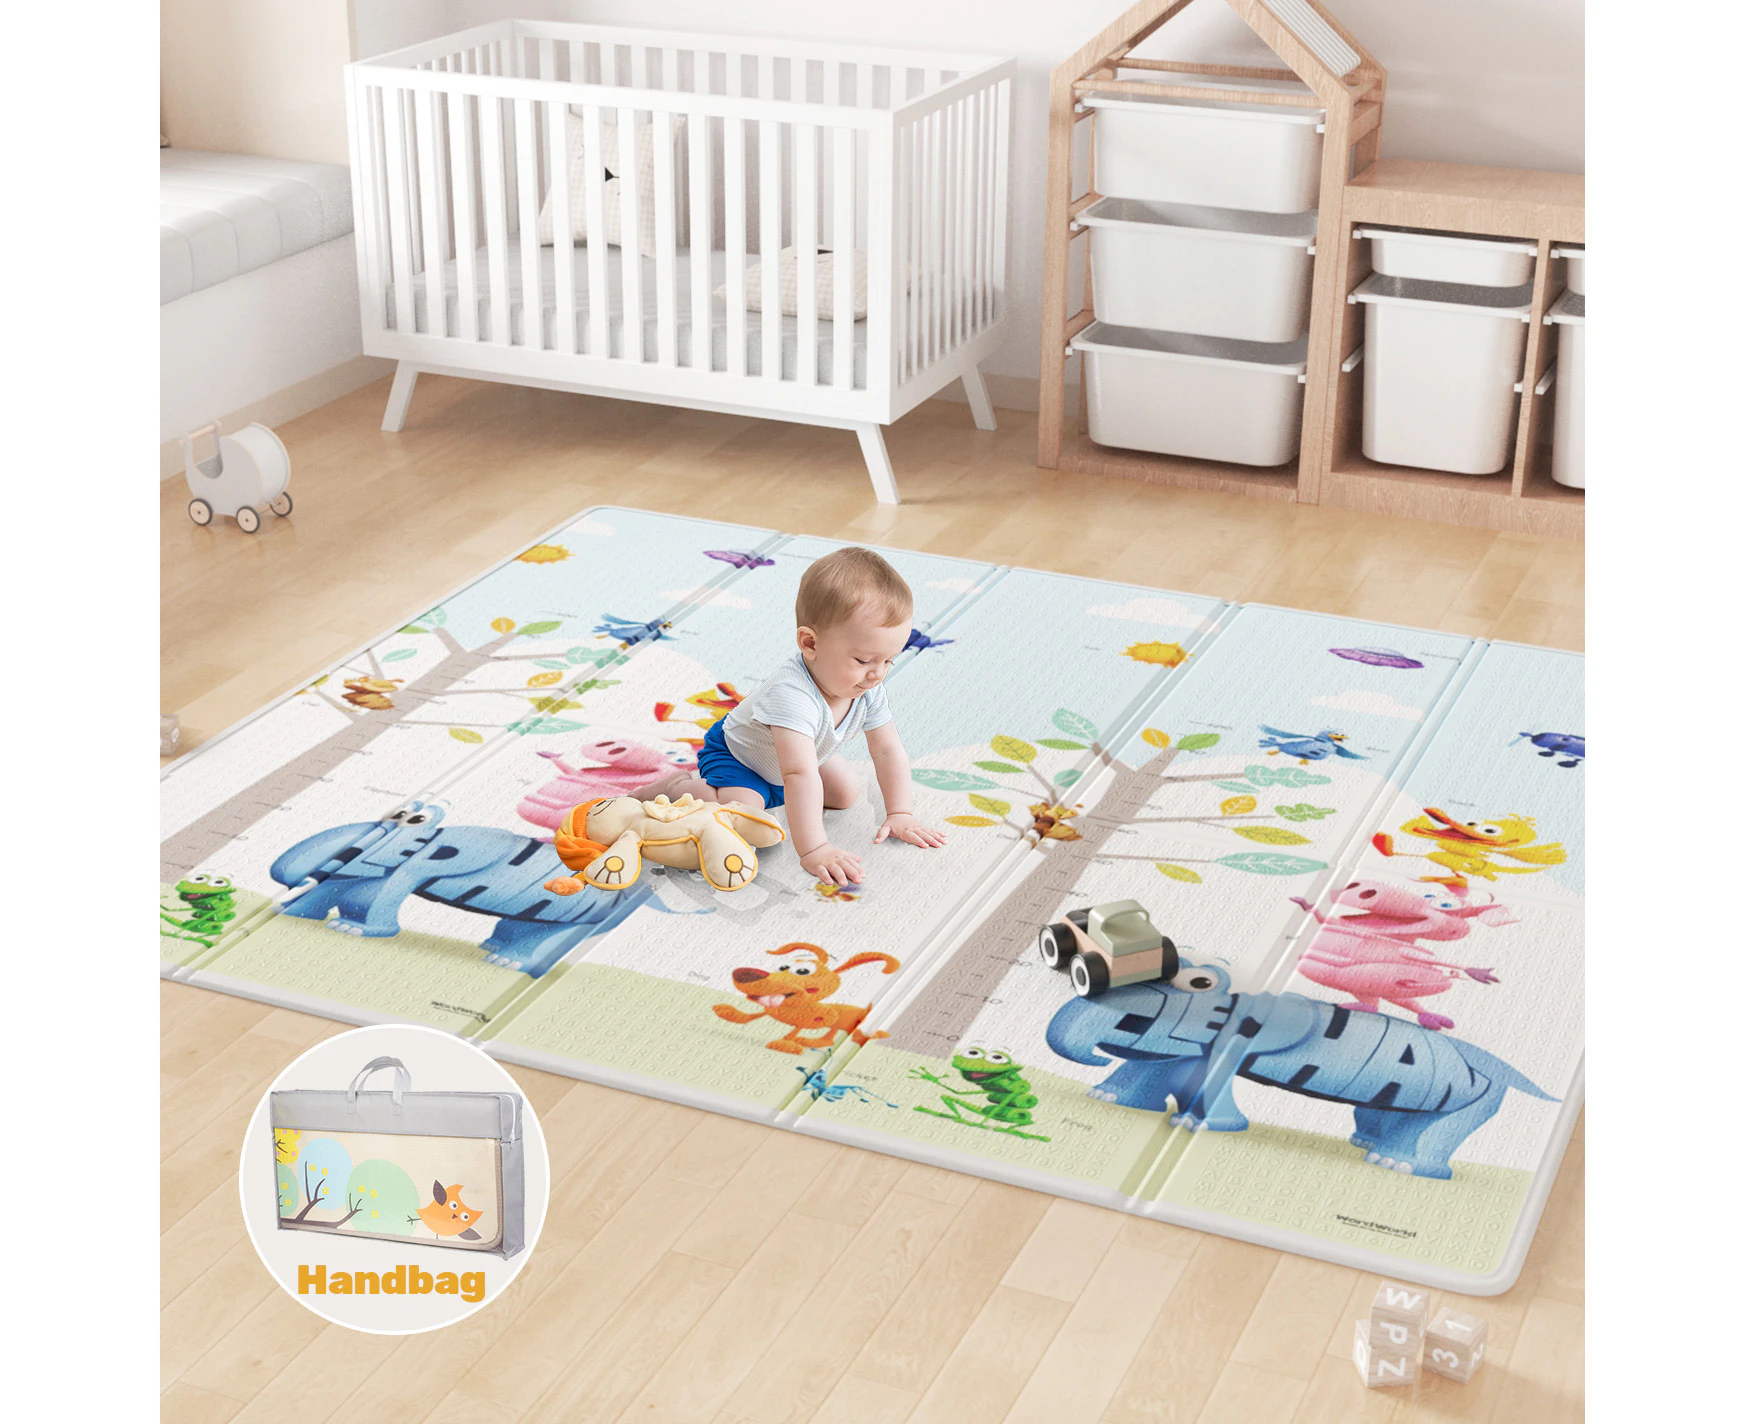 Large 2 Sided Reversible Baby Activity Foam Foldable Play Mat